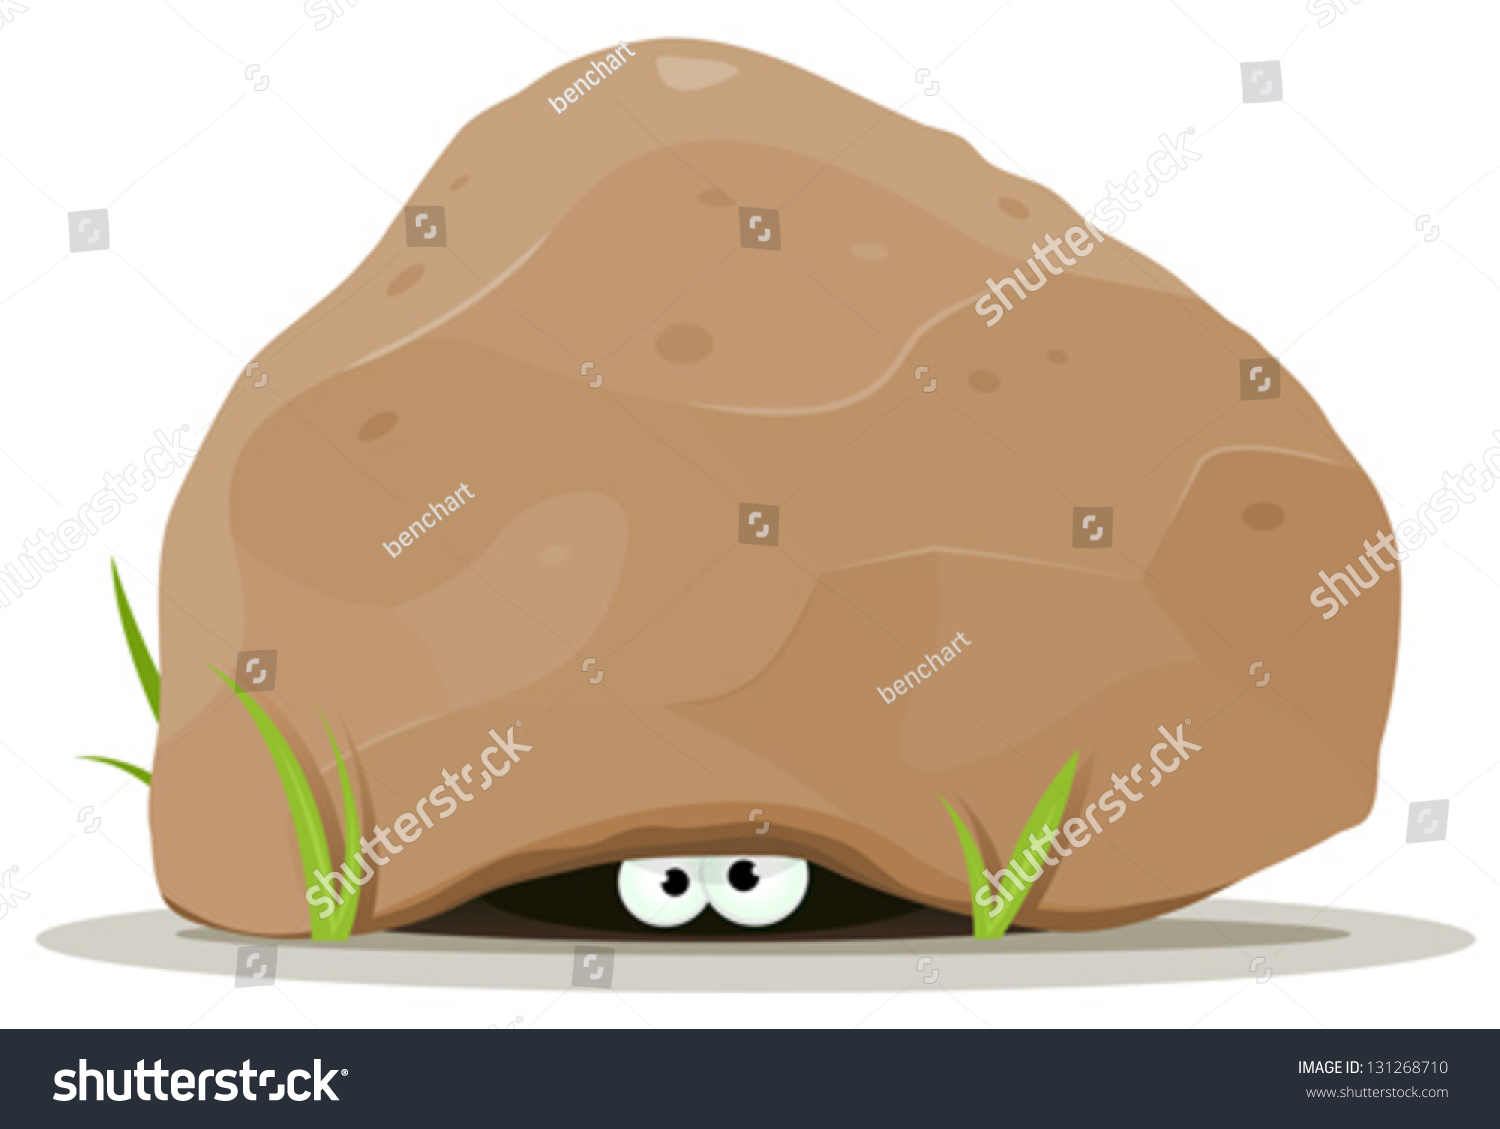 Image result for cartoon of someone peeking out from under a rock